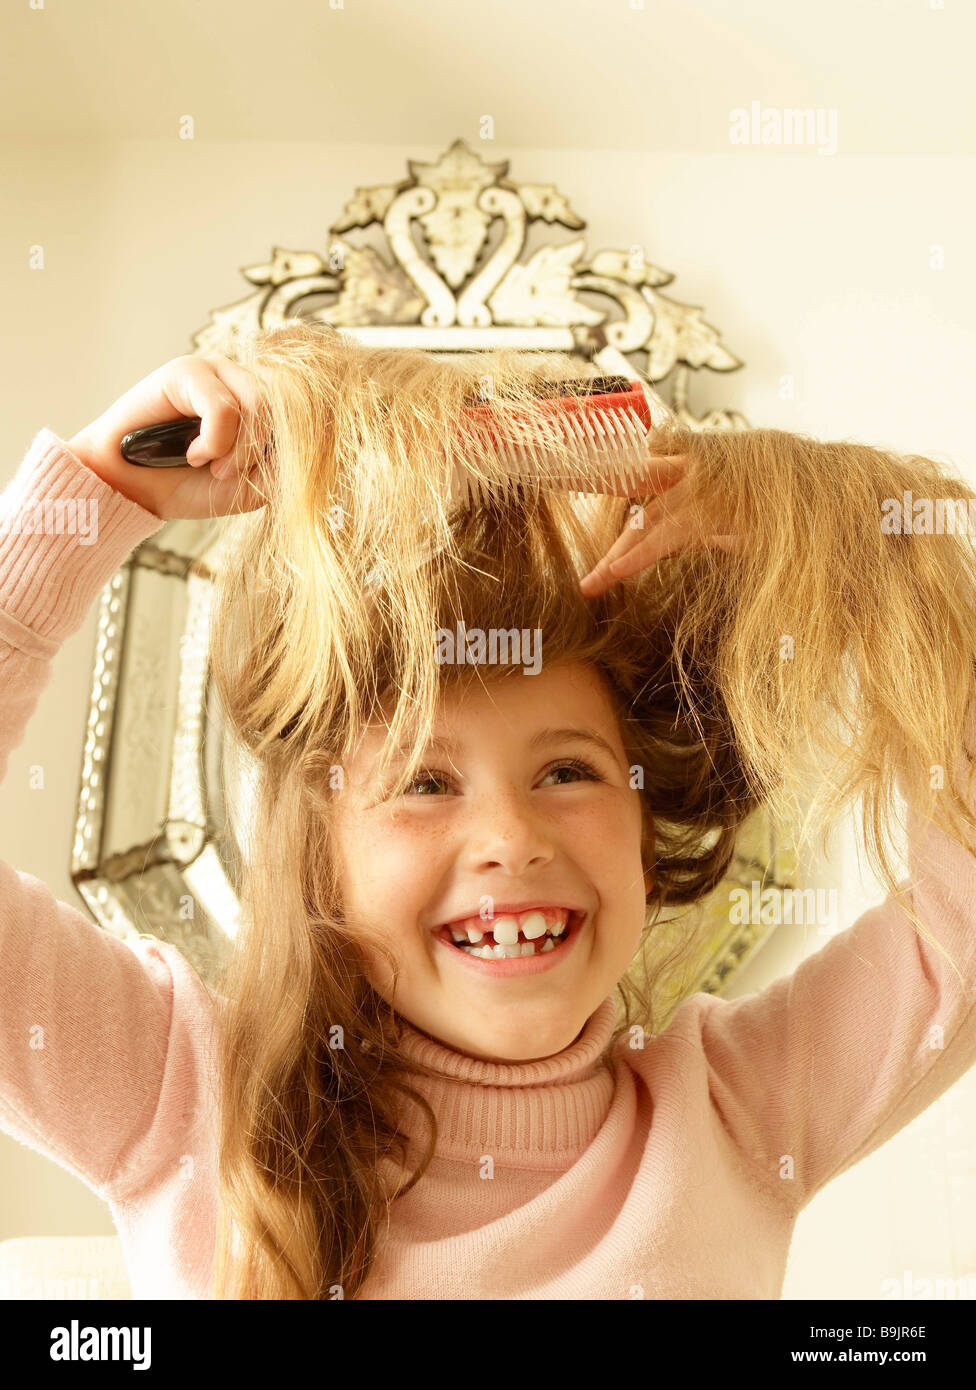 Girl brushing hair Banque D'Images